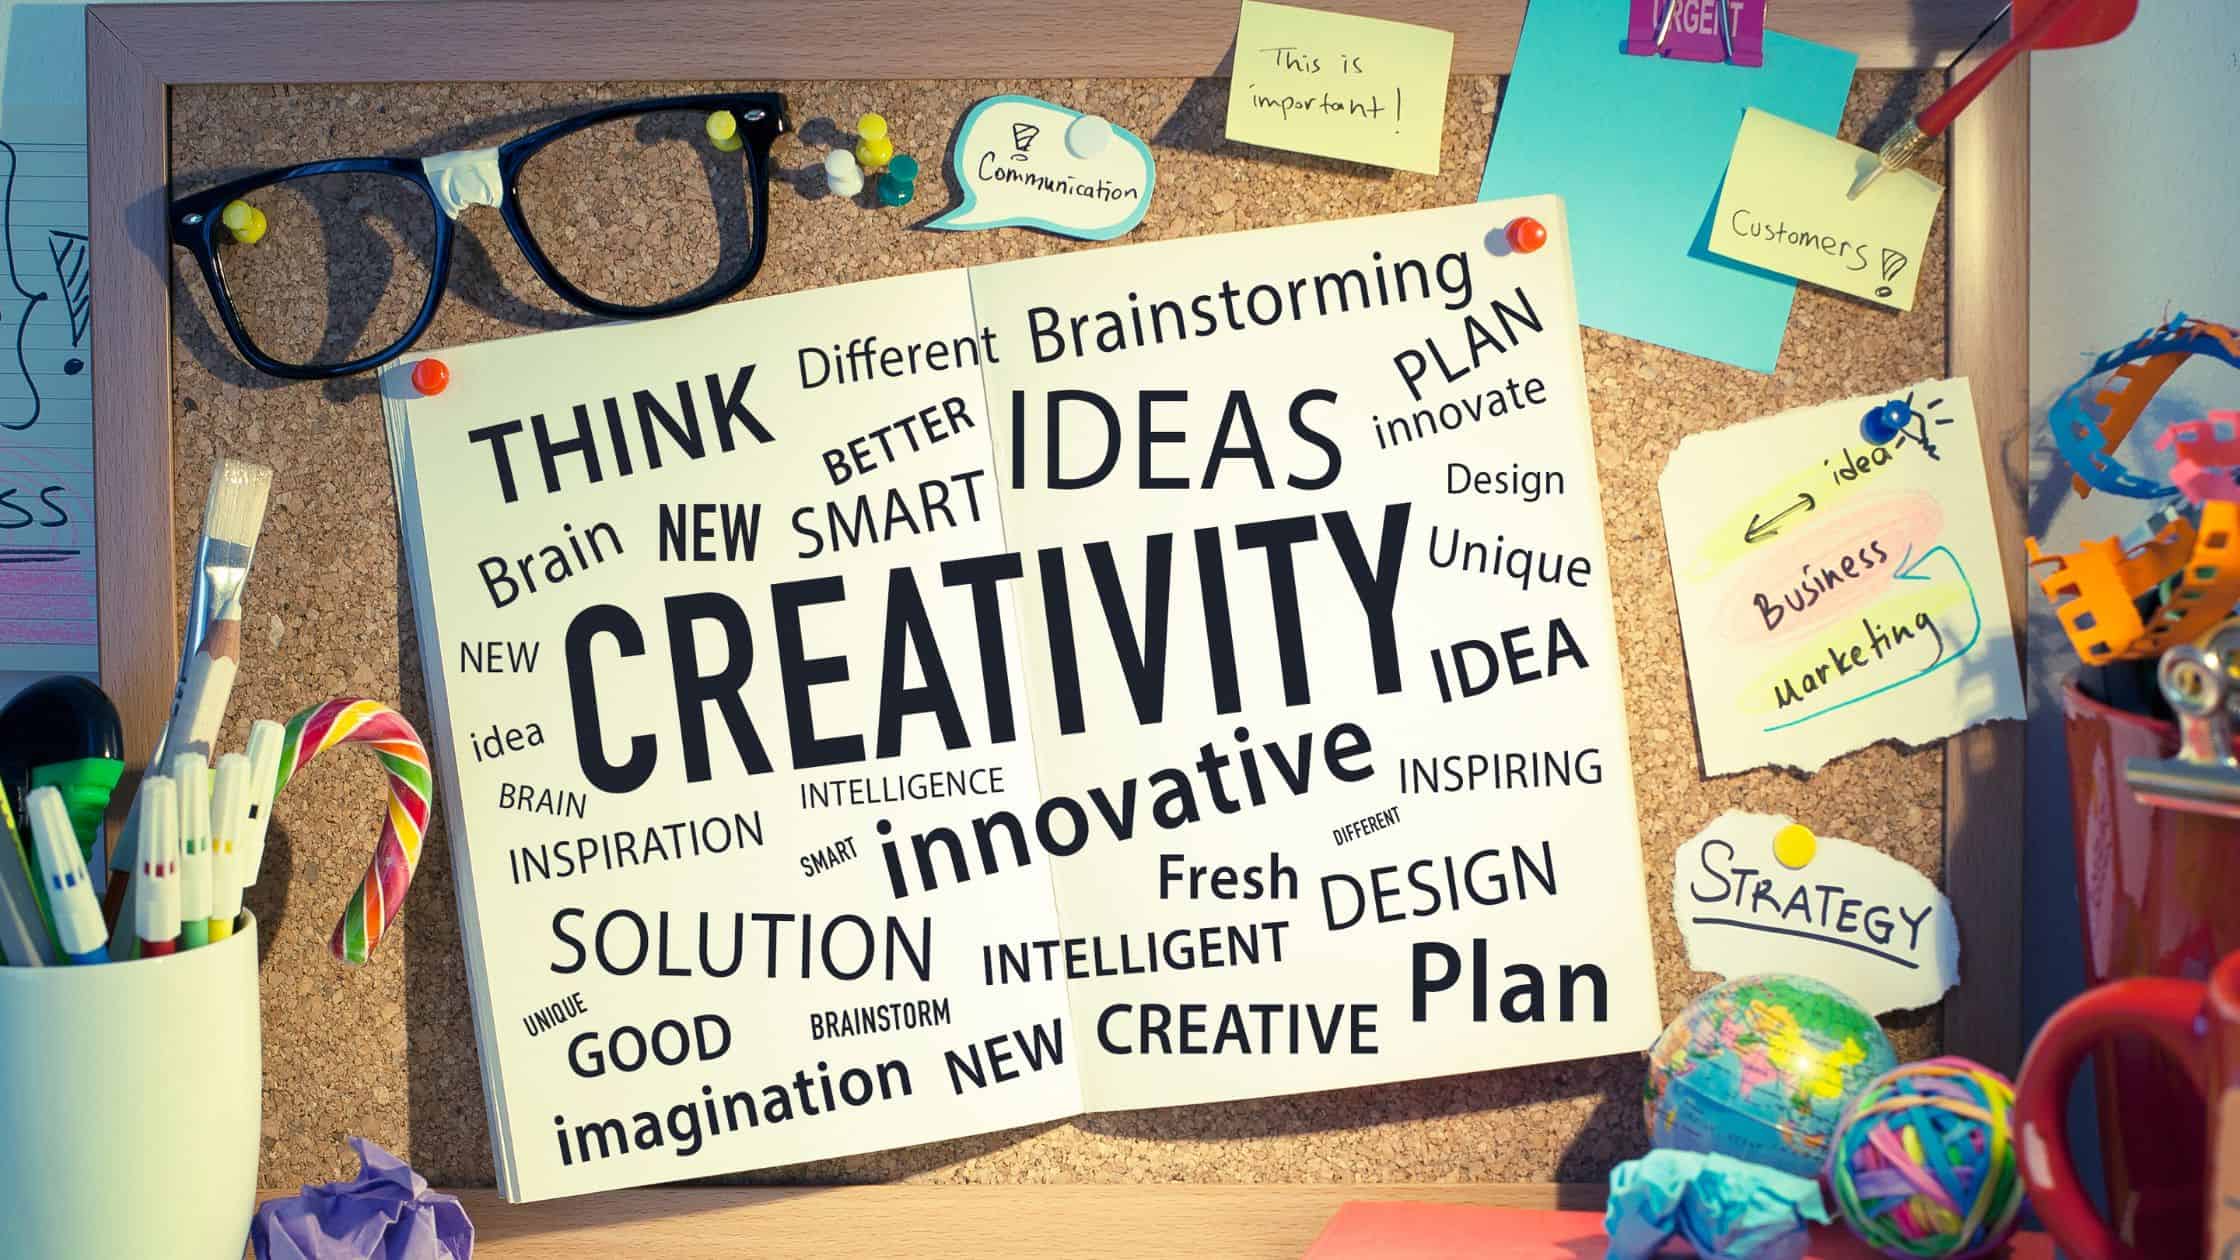 aims to encourage employee creativity innovation and problem solving